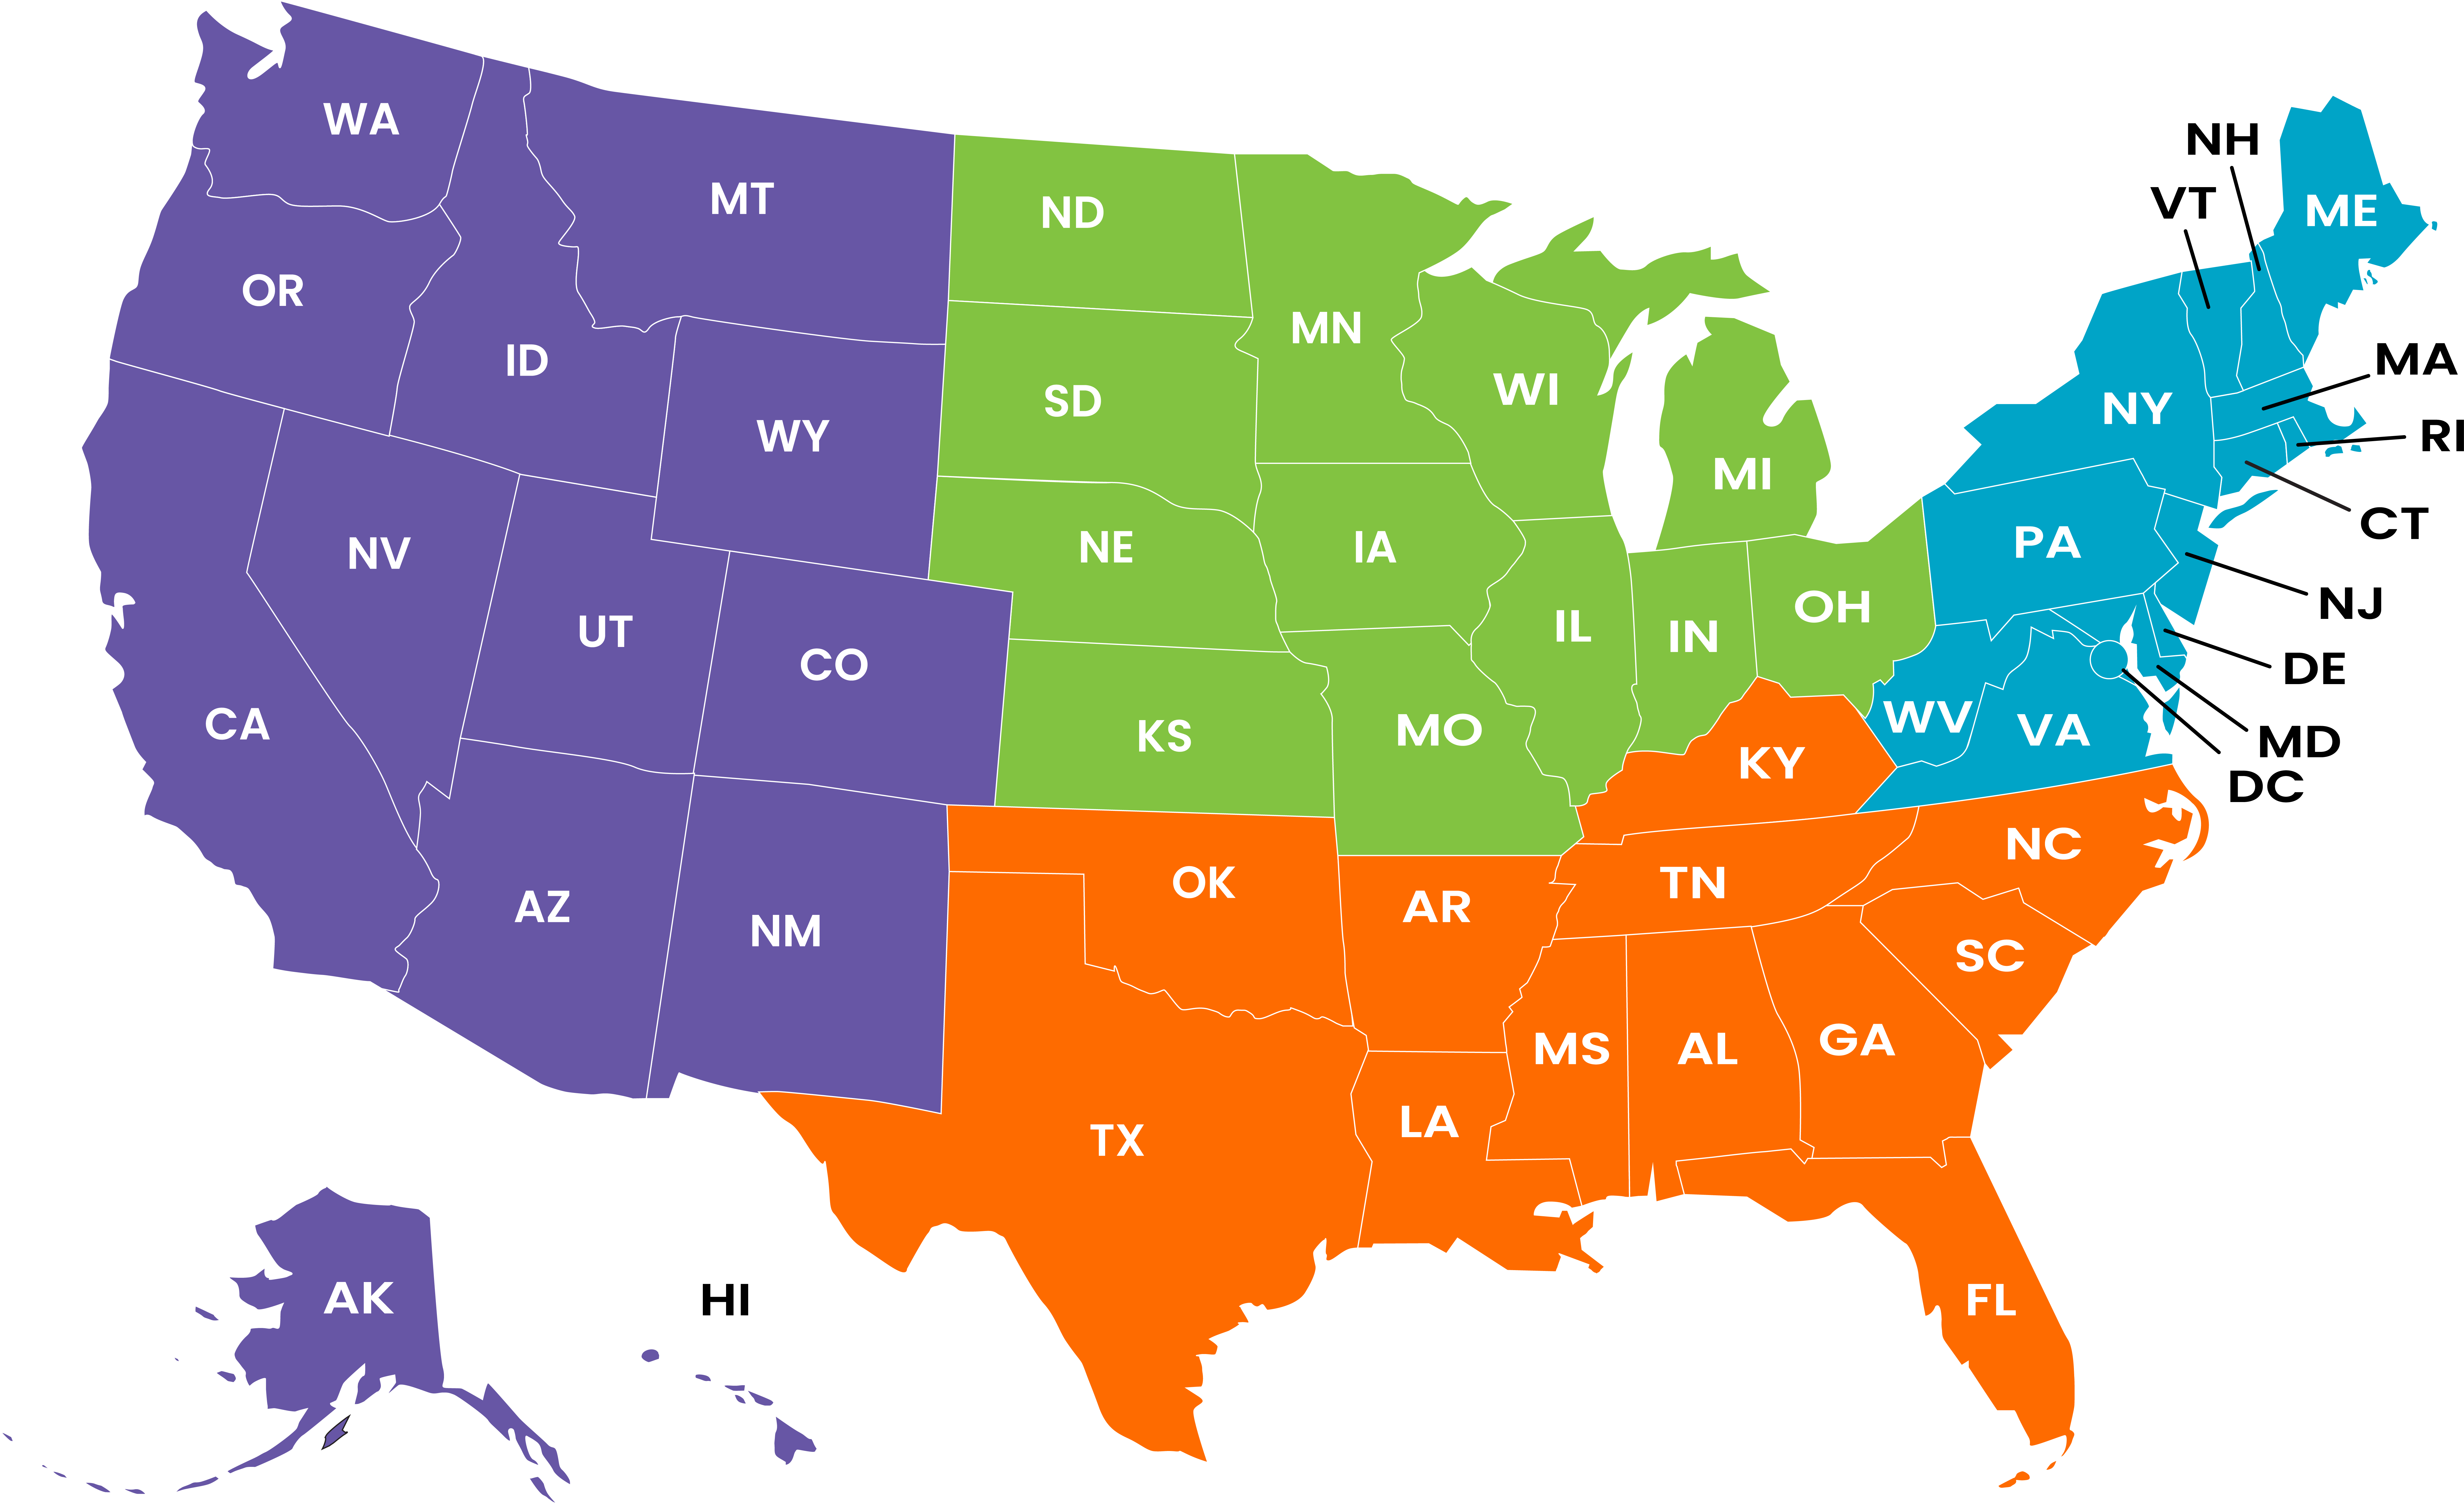 Map of the United States in four different colors depicting West, Southeast, Midwest, and Northeast regions. The Southeast region is colored orange and includes the states of AL, AR, FL, GA, KY, LA, MS, NC, OK, SC, TN, and TX. The Northeast region is colored blue and includes the states of CT, DE, MD, MA, ME, NH, NJ, NY, PA, RI, VA, VT, WV, and DC. The Midwest region is colored green and includes the states of IL, IN, IA, KS, MI, MN, MO, NE, ND, OH, SD, and WI. The West region is colored purple and includes the states of AK, AZ, CA, CO, HI, ID, MT, NV, NM, OR, UT, WA, and WY.